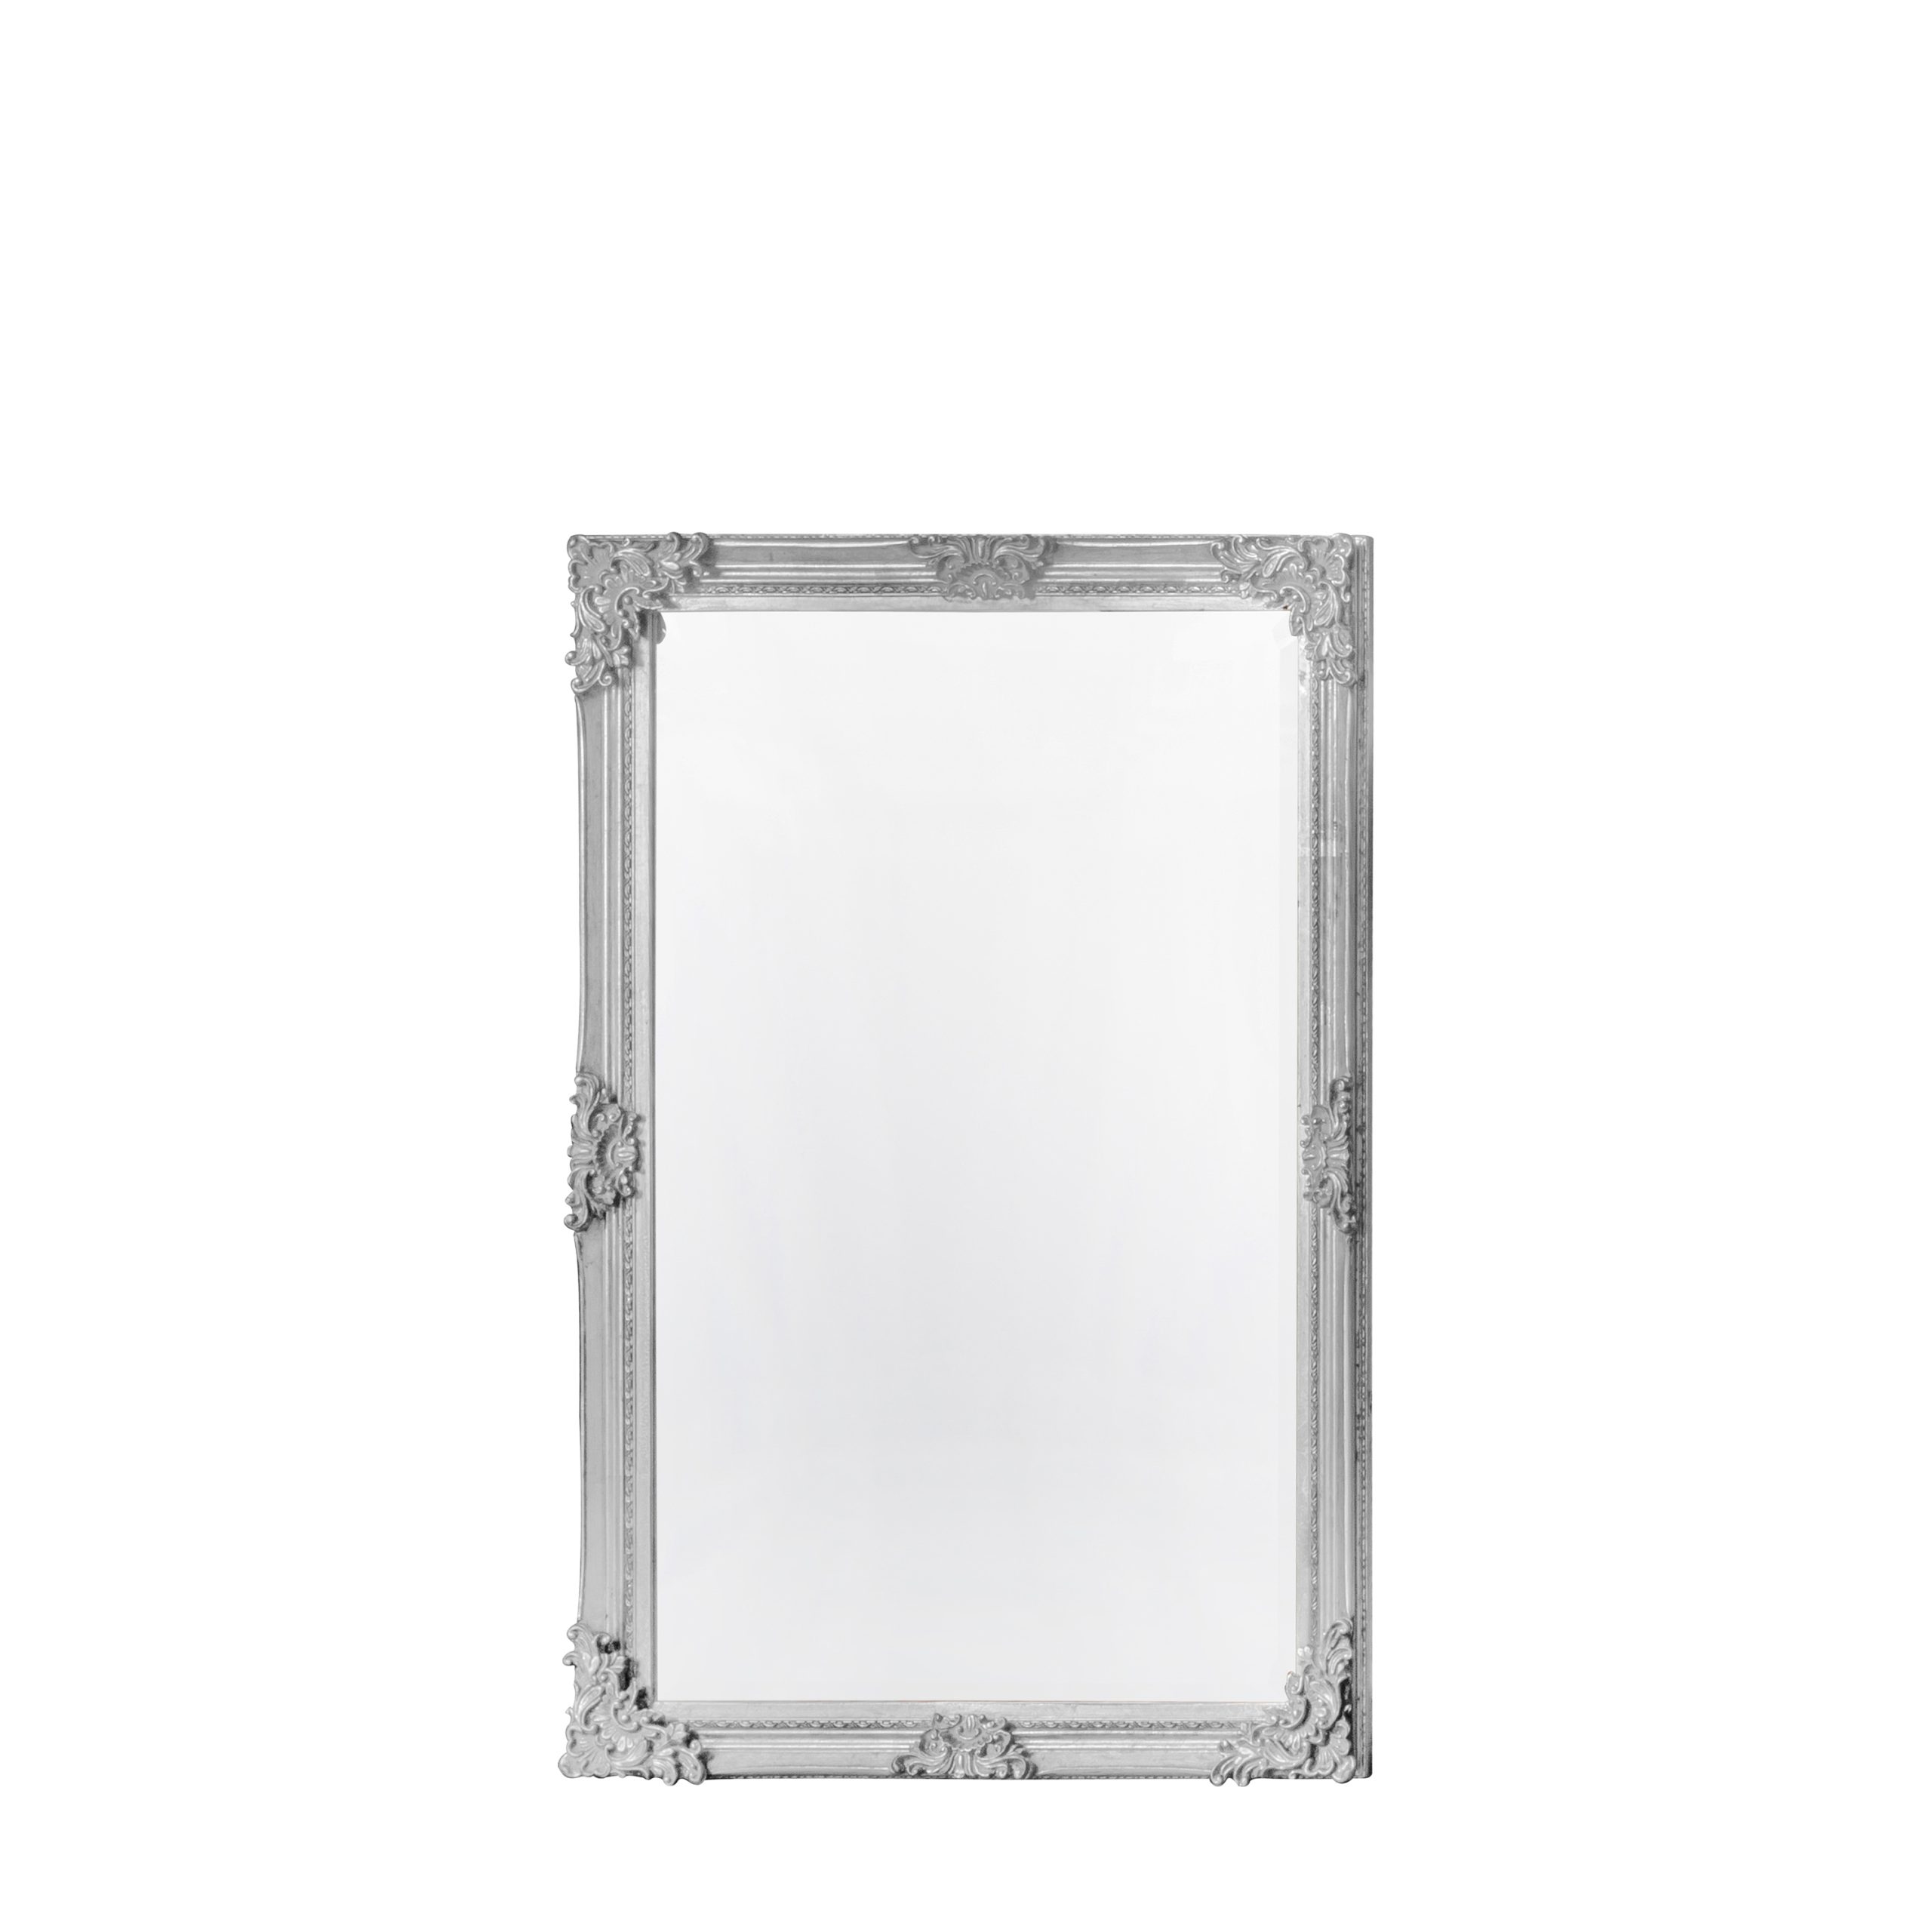 Gallery Direct Fiennes Rectangle Mirror Antique White